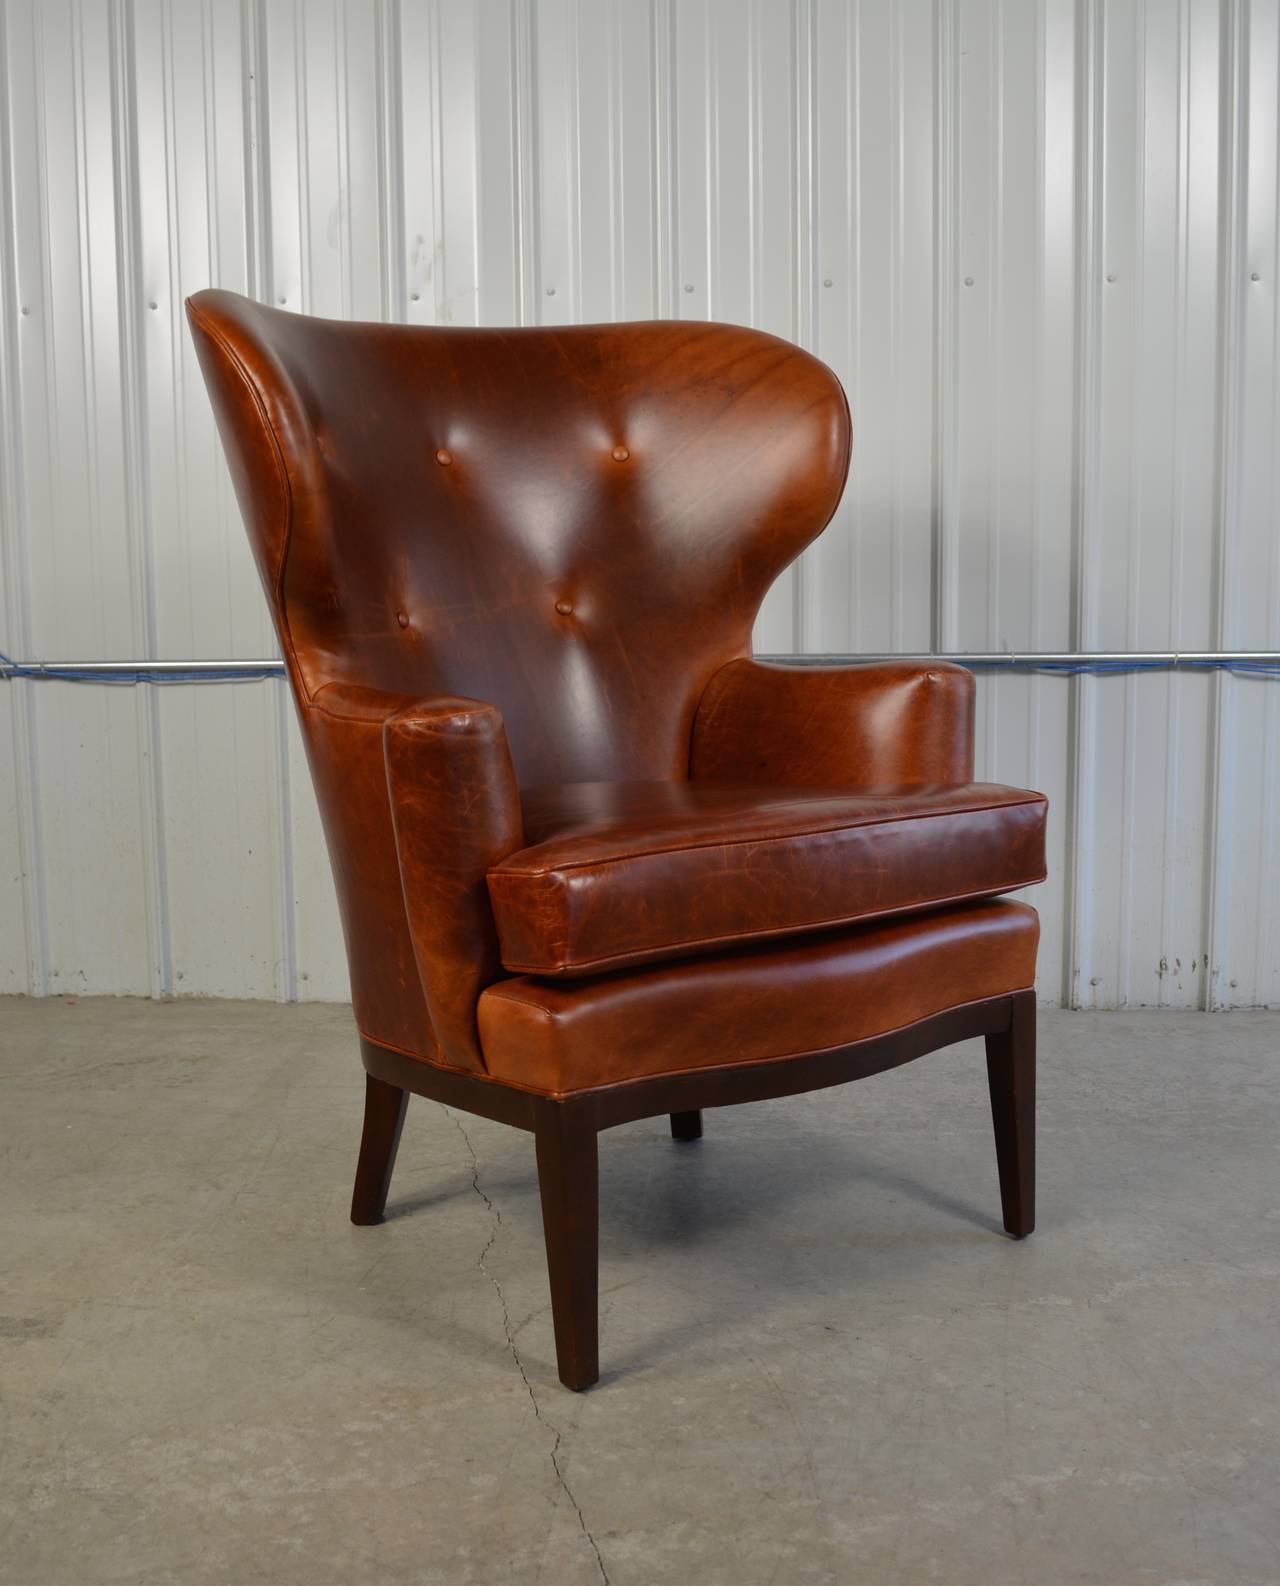 A rare early wingback chair by Edward Wormley for Dunbar in chestnut leather.